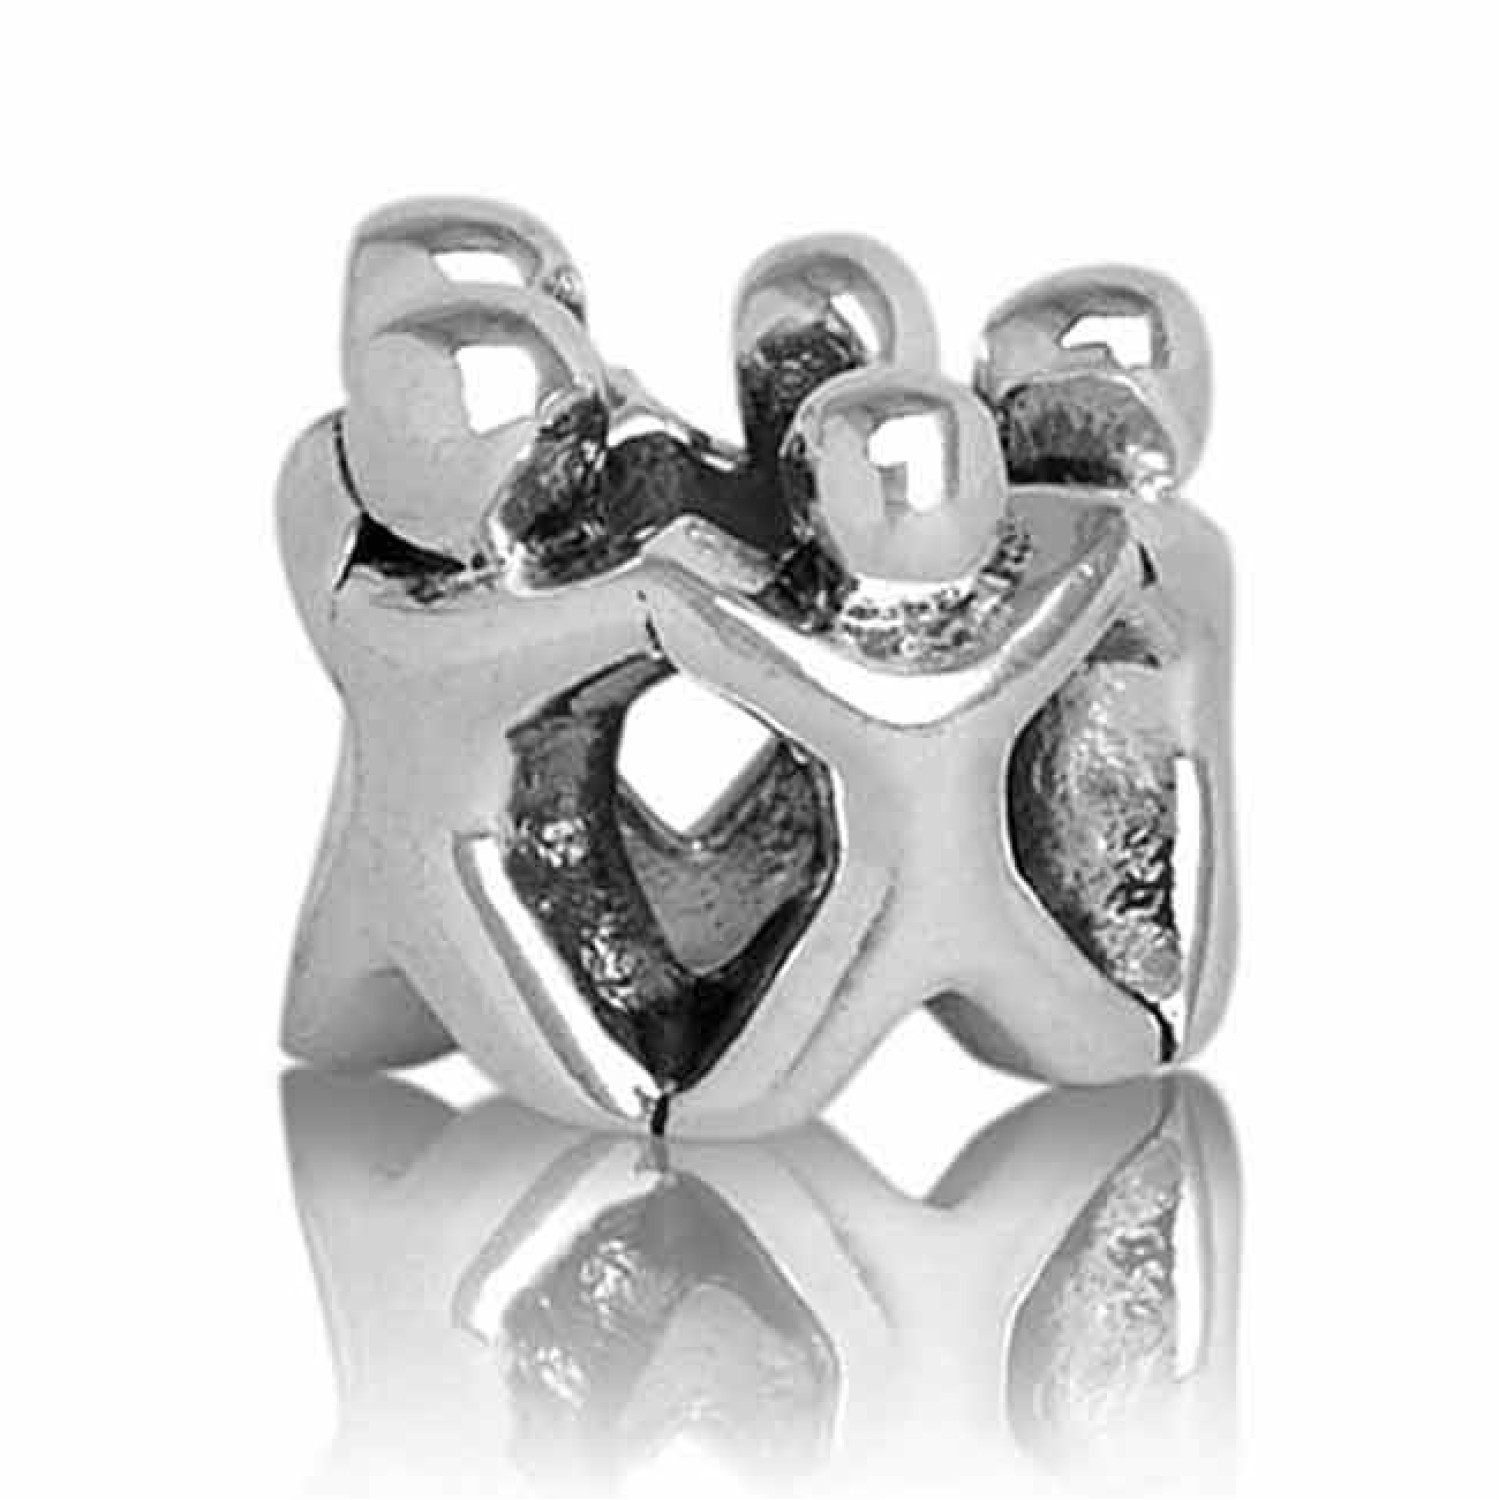 LK104 Evolve NZ Charm Family Circle  - Whanau. Evolve New Zealand Inspired Charms LK104 Evolve NZ Charm Family Circle  - Whanau Whanau meaning extended Family in Maori represents the strength and importance of the circle of family and friends. It rem @chr